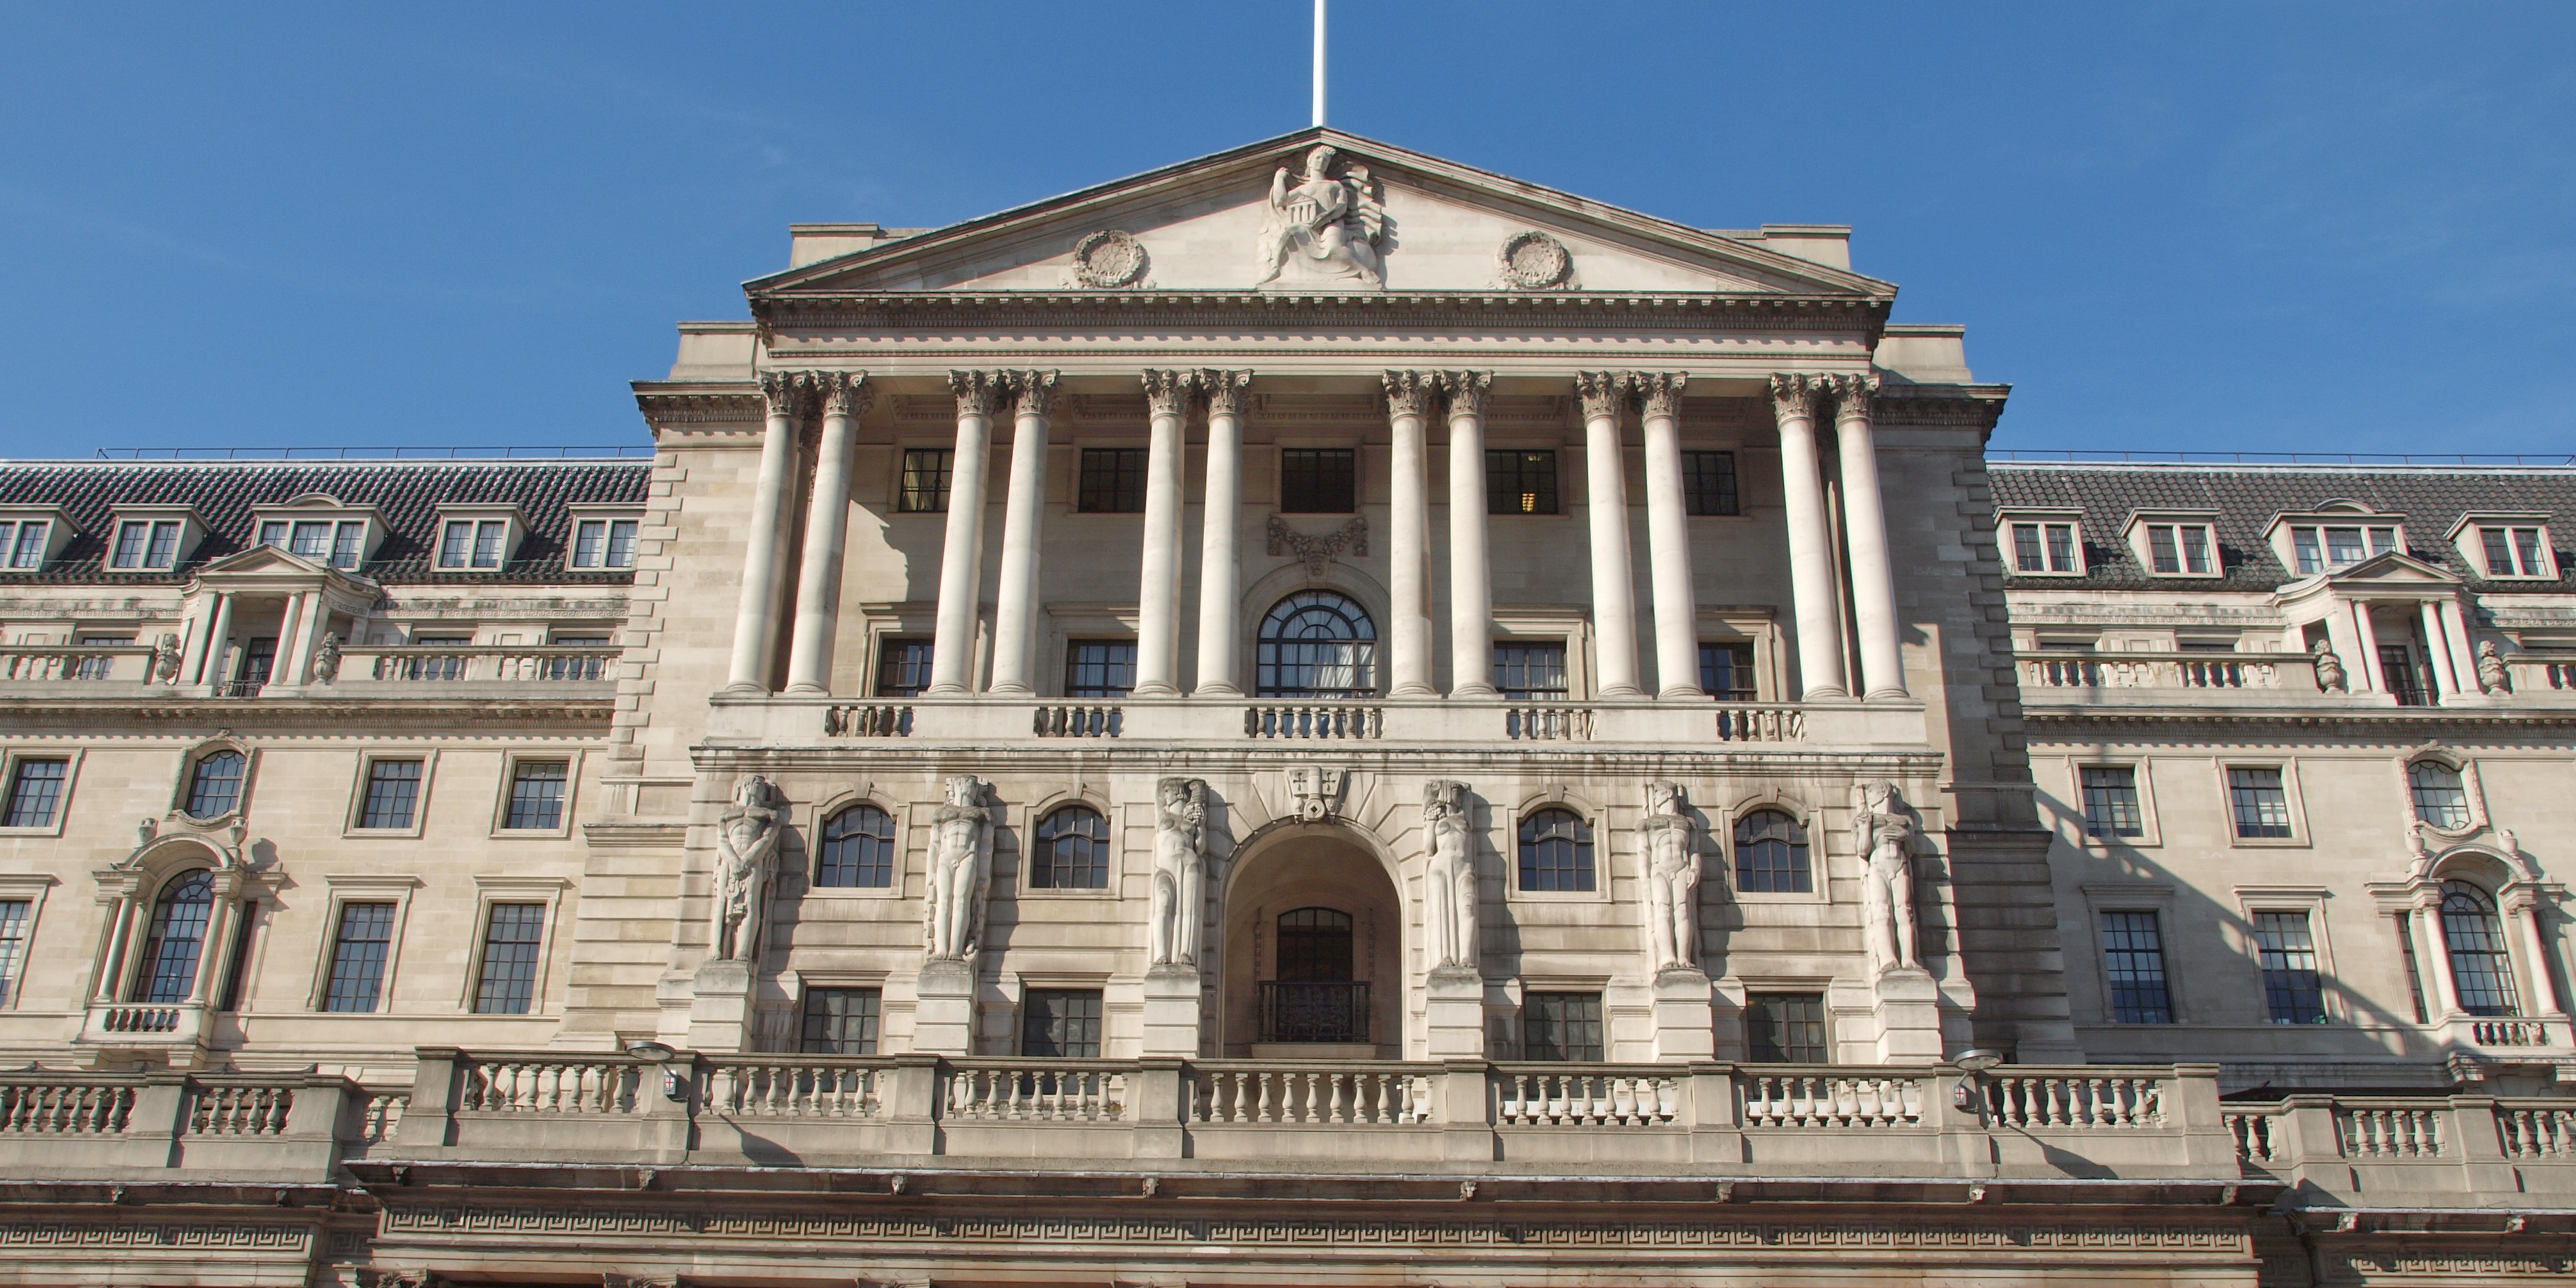 Yet more confusing signals from the Bank of England